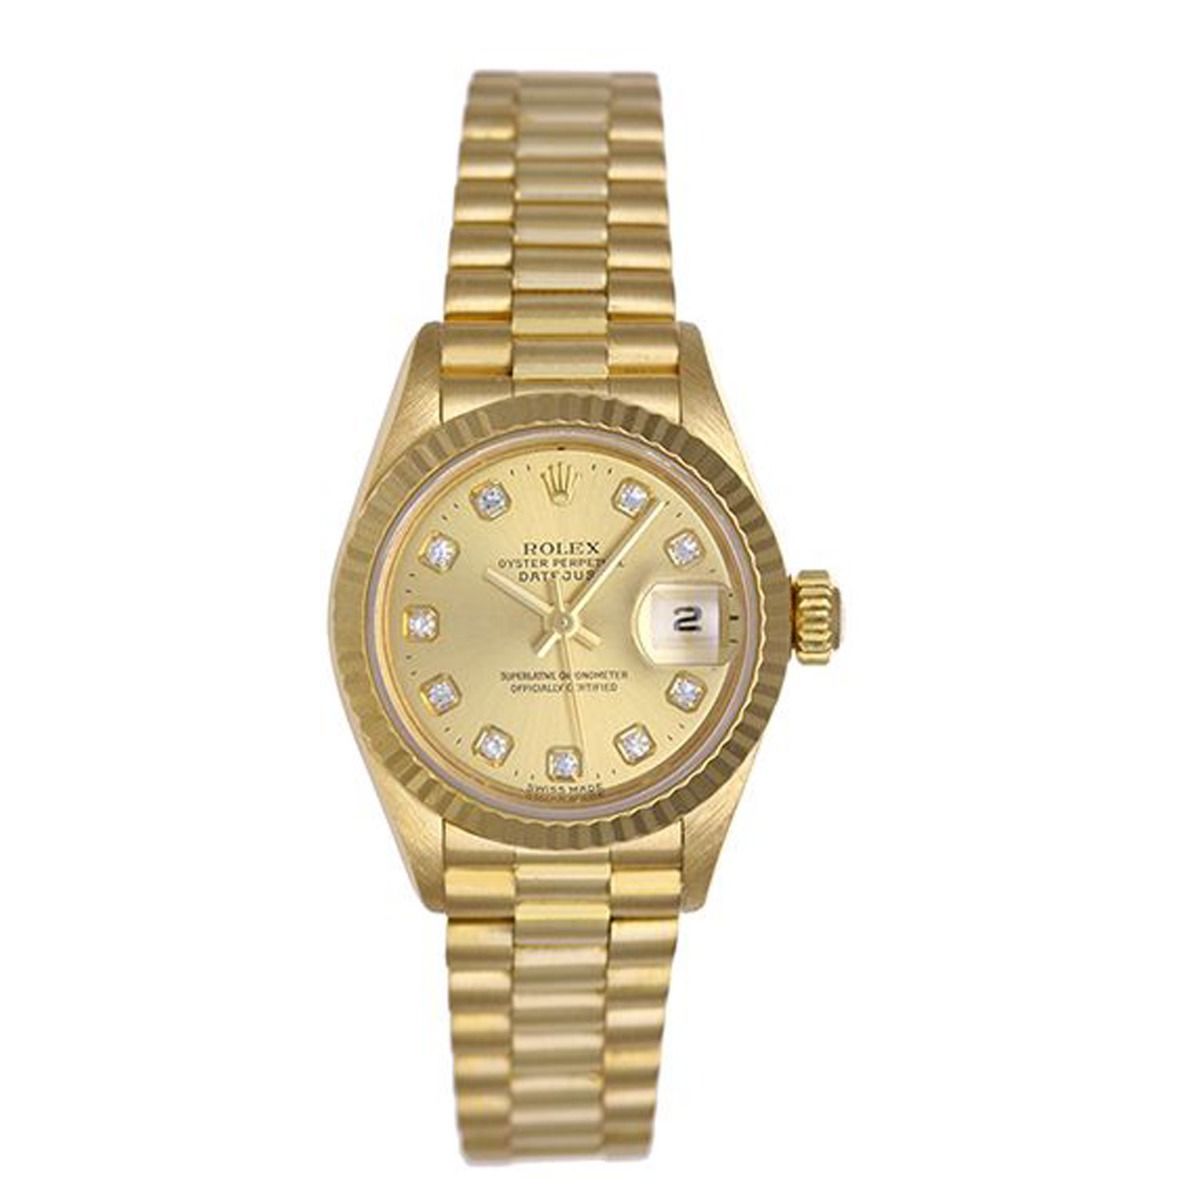 Full 18kt Gold 26mm Factory Diamond Rolex Datejust Come Auction